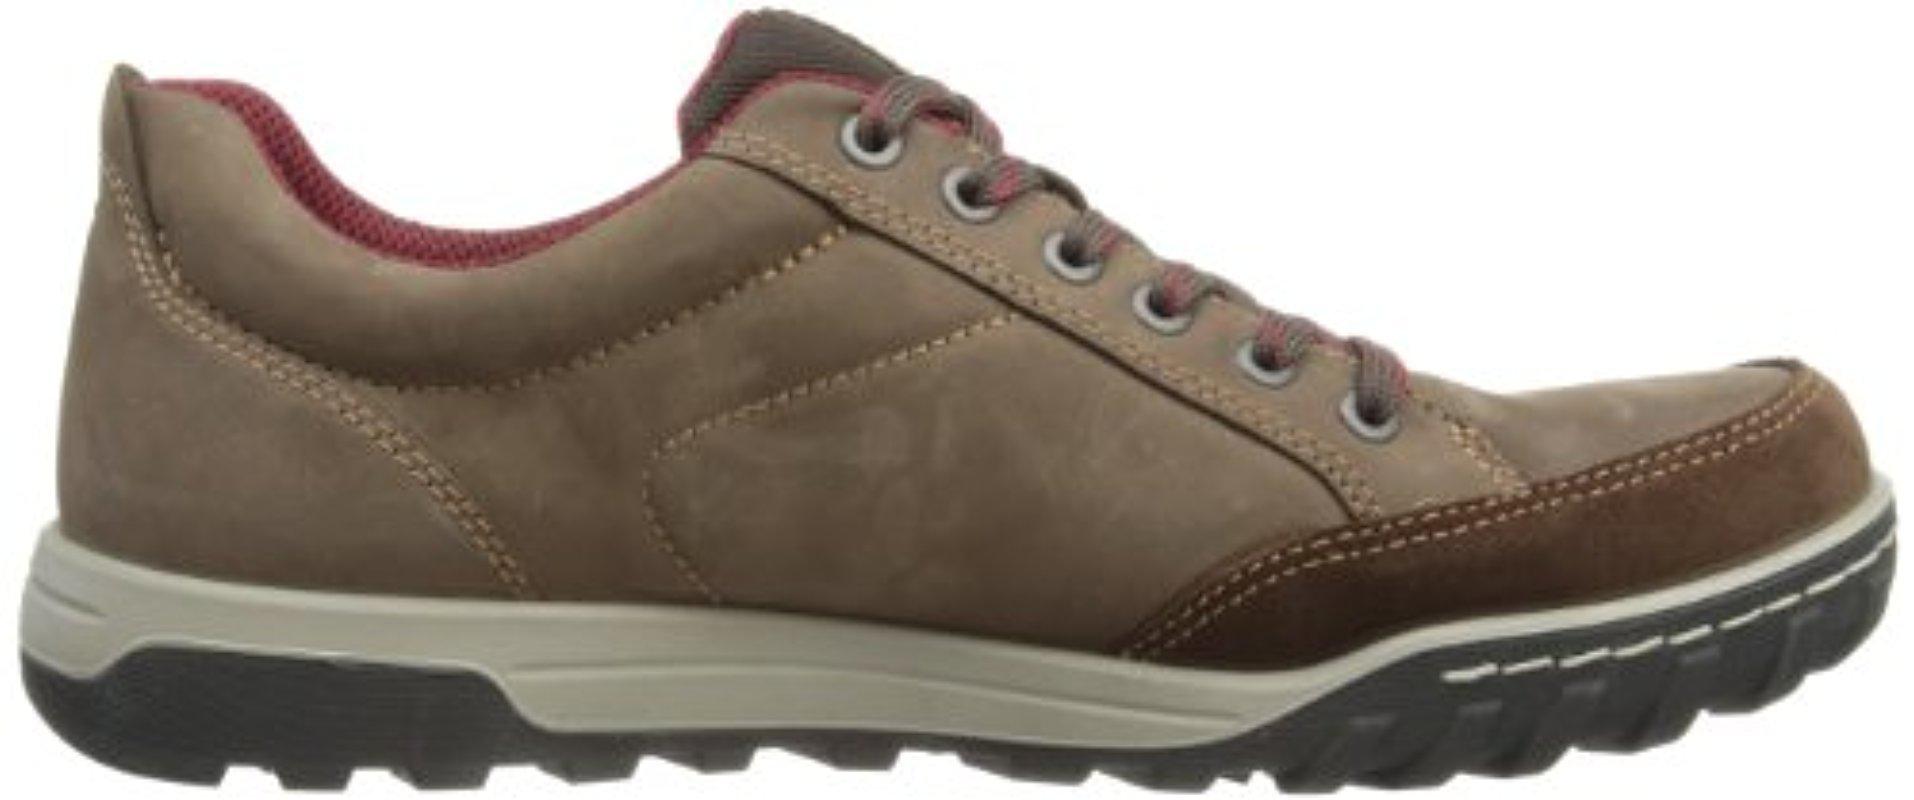 ecco vermont hiking shoes